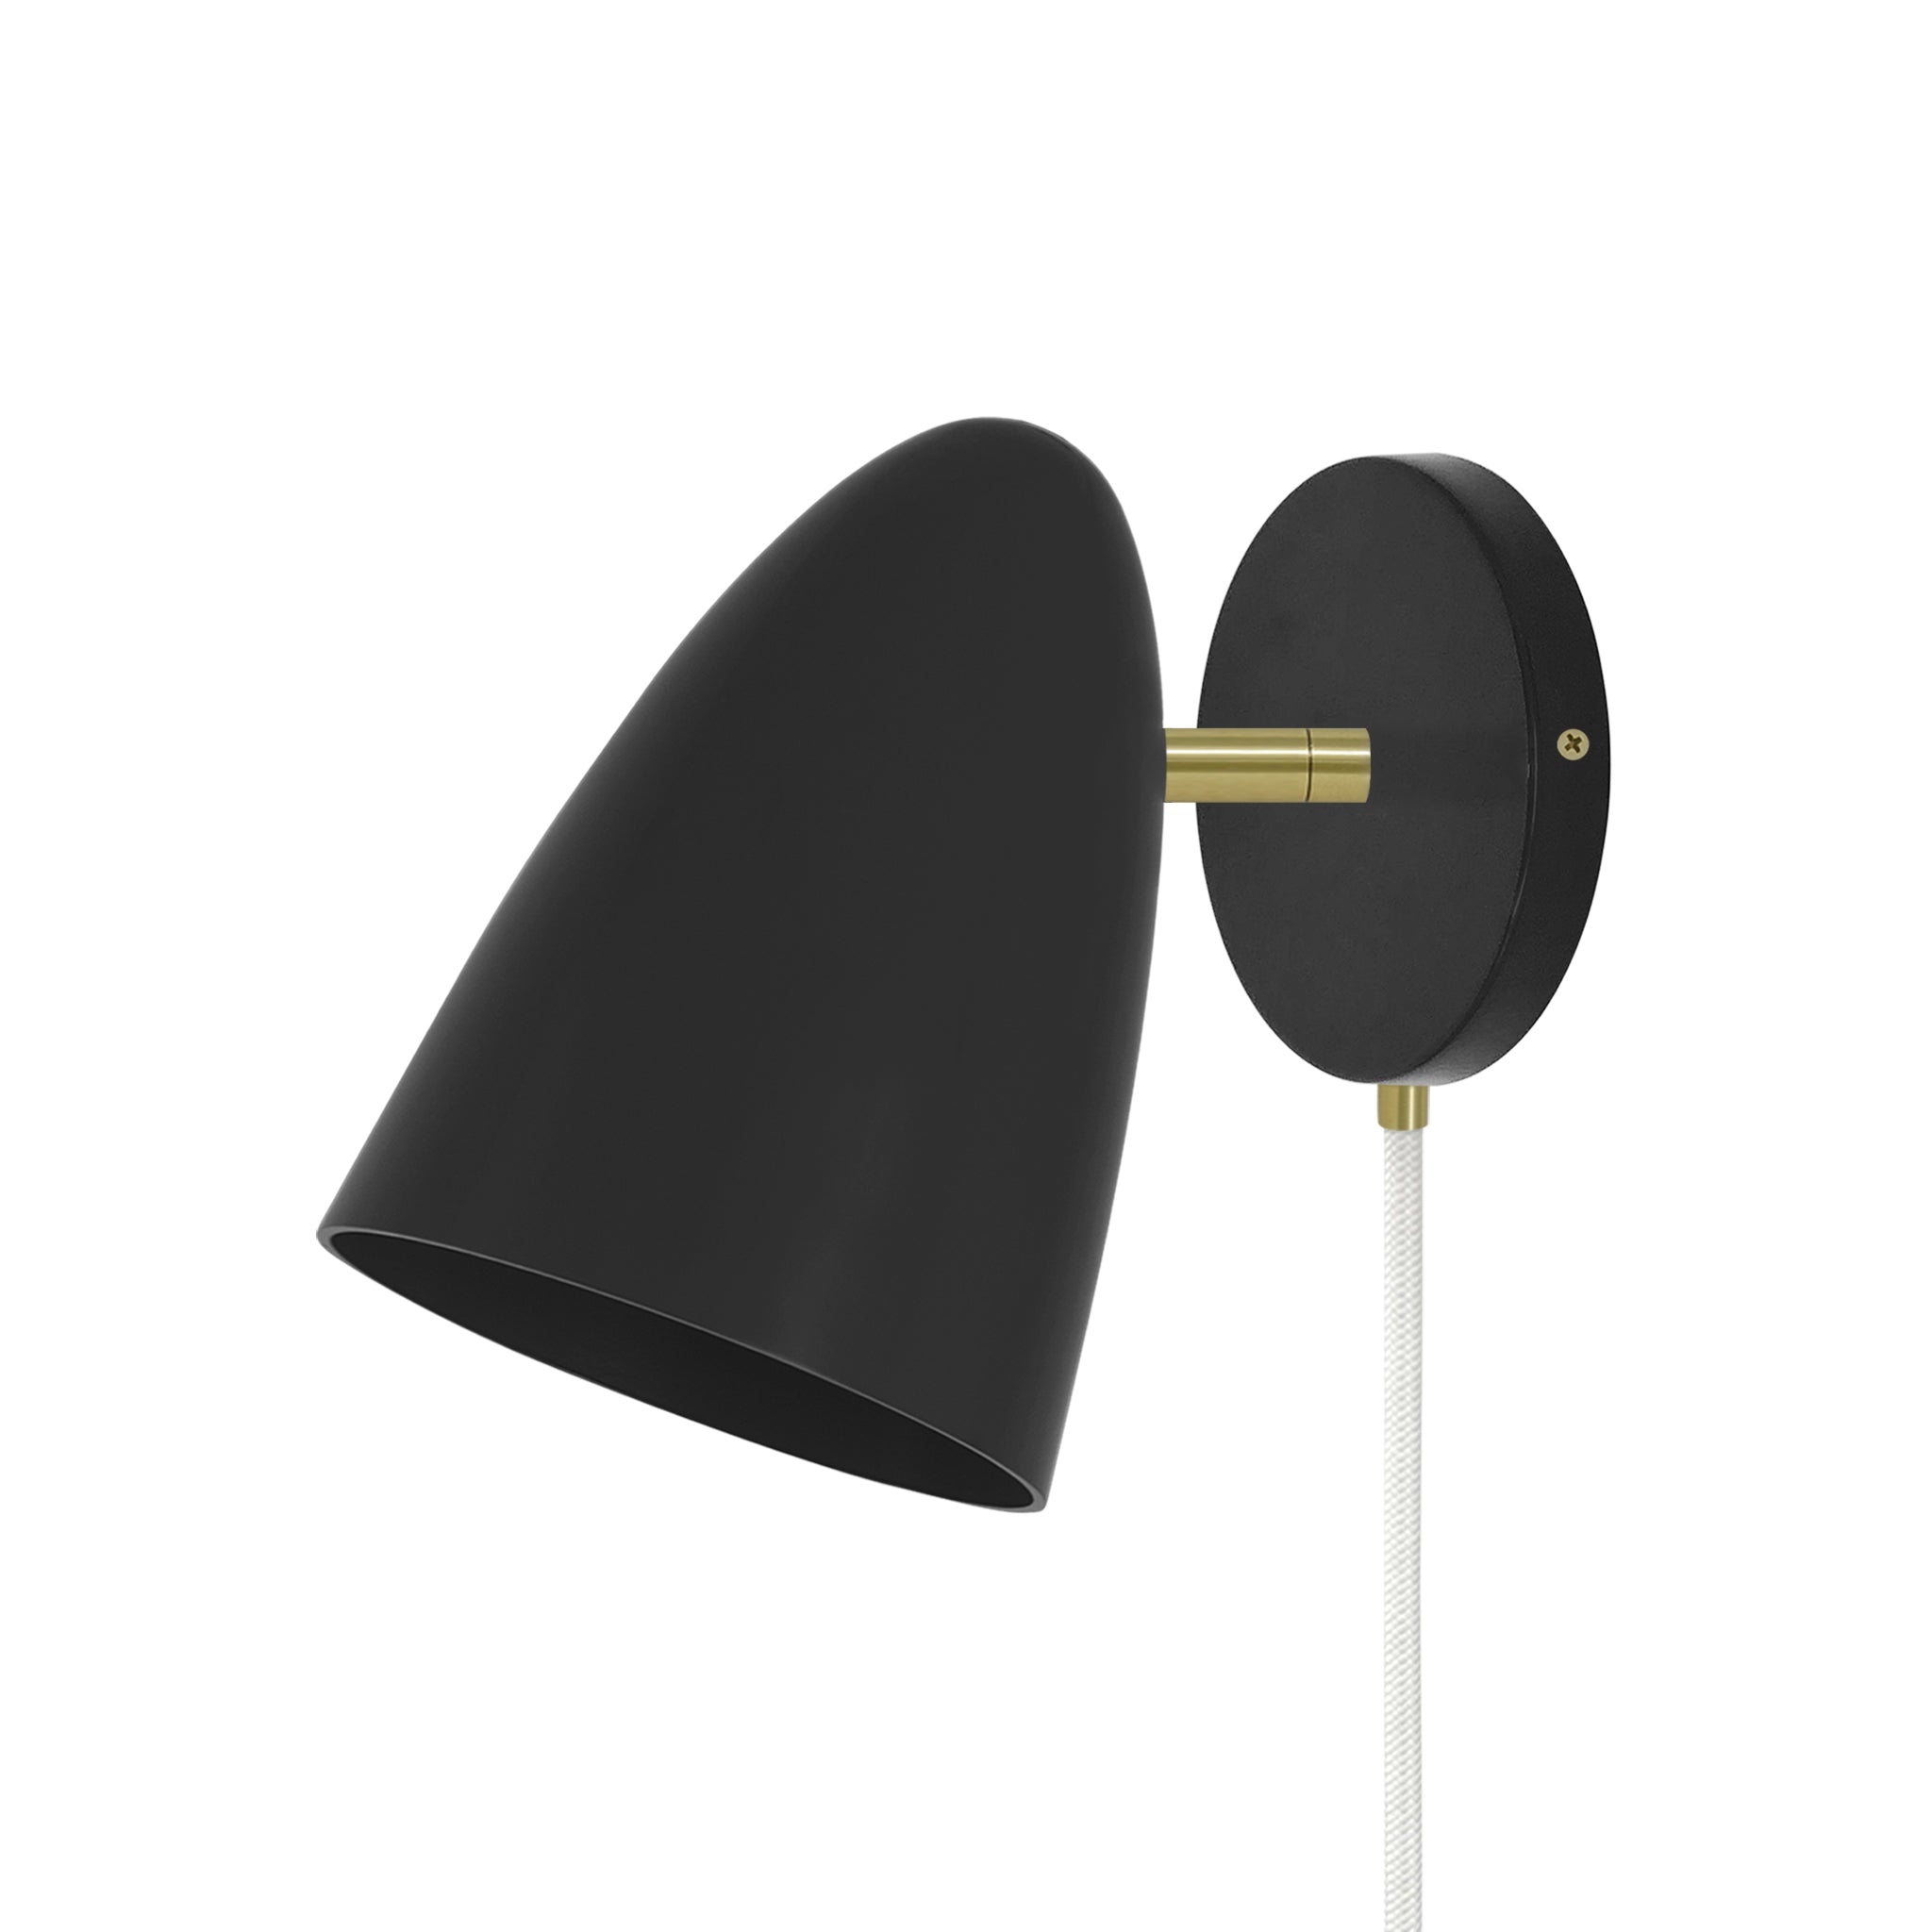 Brass and black color Boom plug-in sconce no arm Dutton Brown lighting